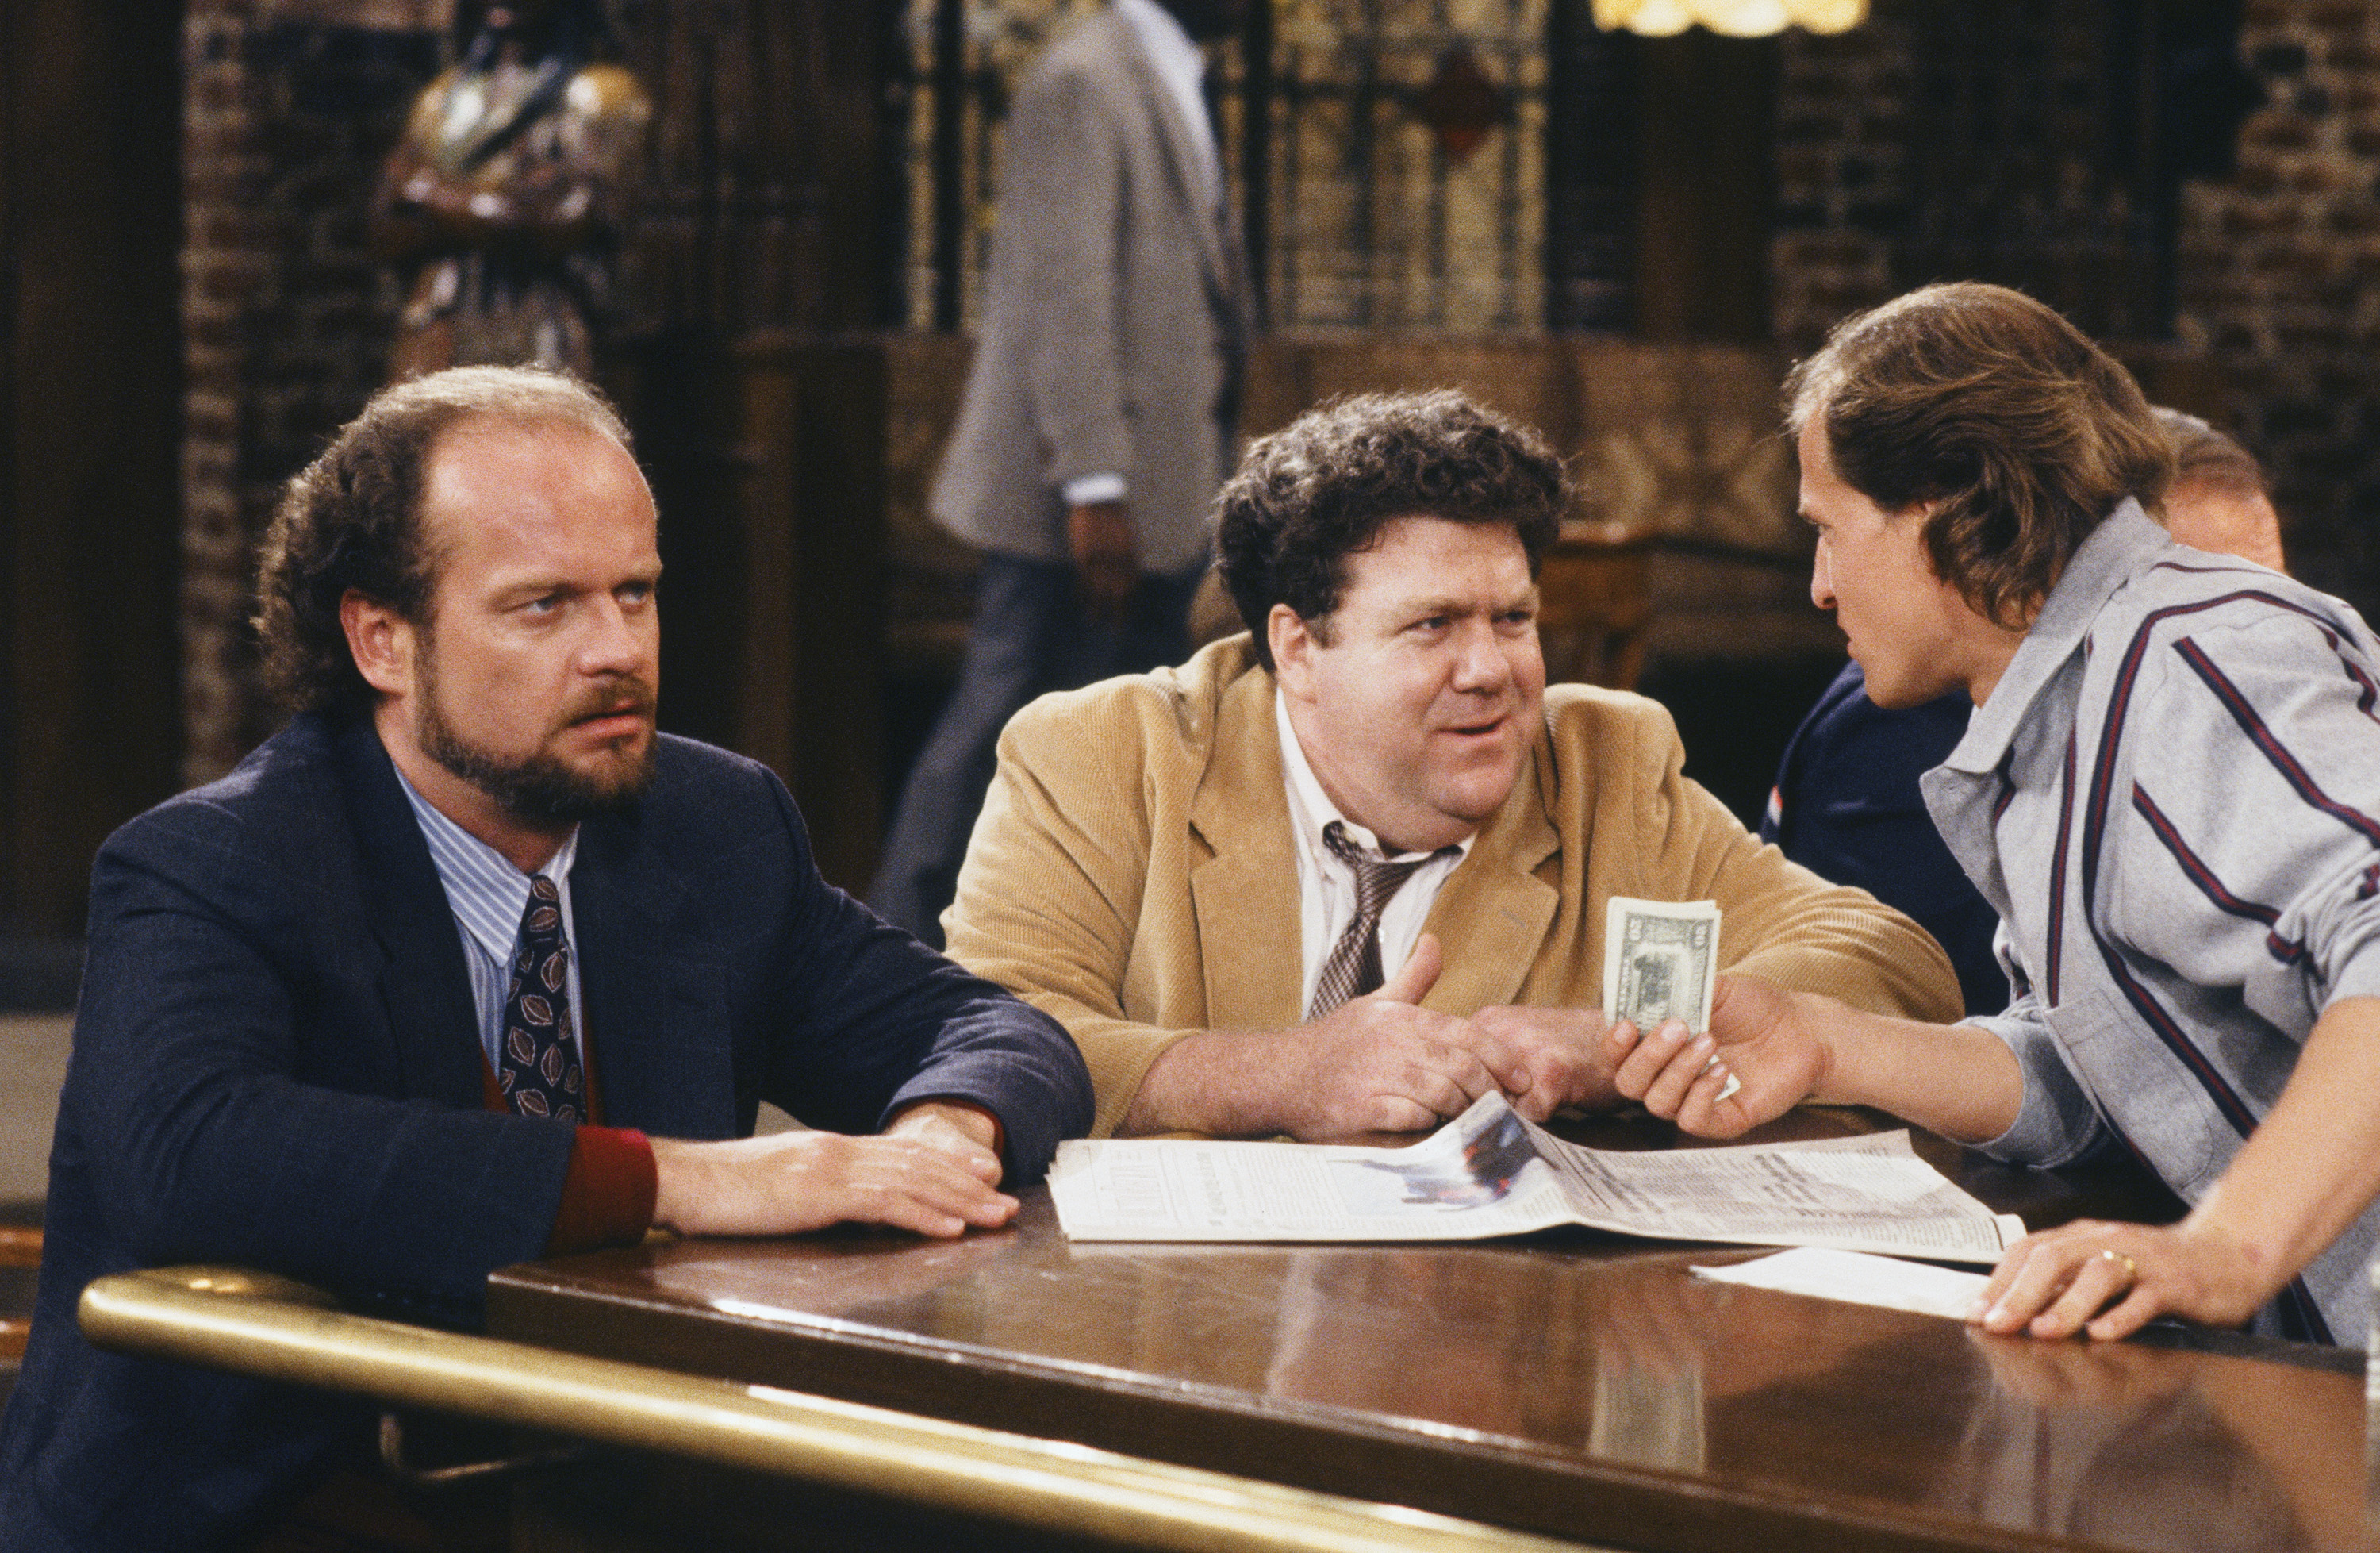 Kelsey Grammer as Dr. Frasier Crane, George Wendt as Norm Peterson, and Woody Harrelson as Woody Boyd in "Cheers," circa 1993 | Source: Getty Images